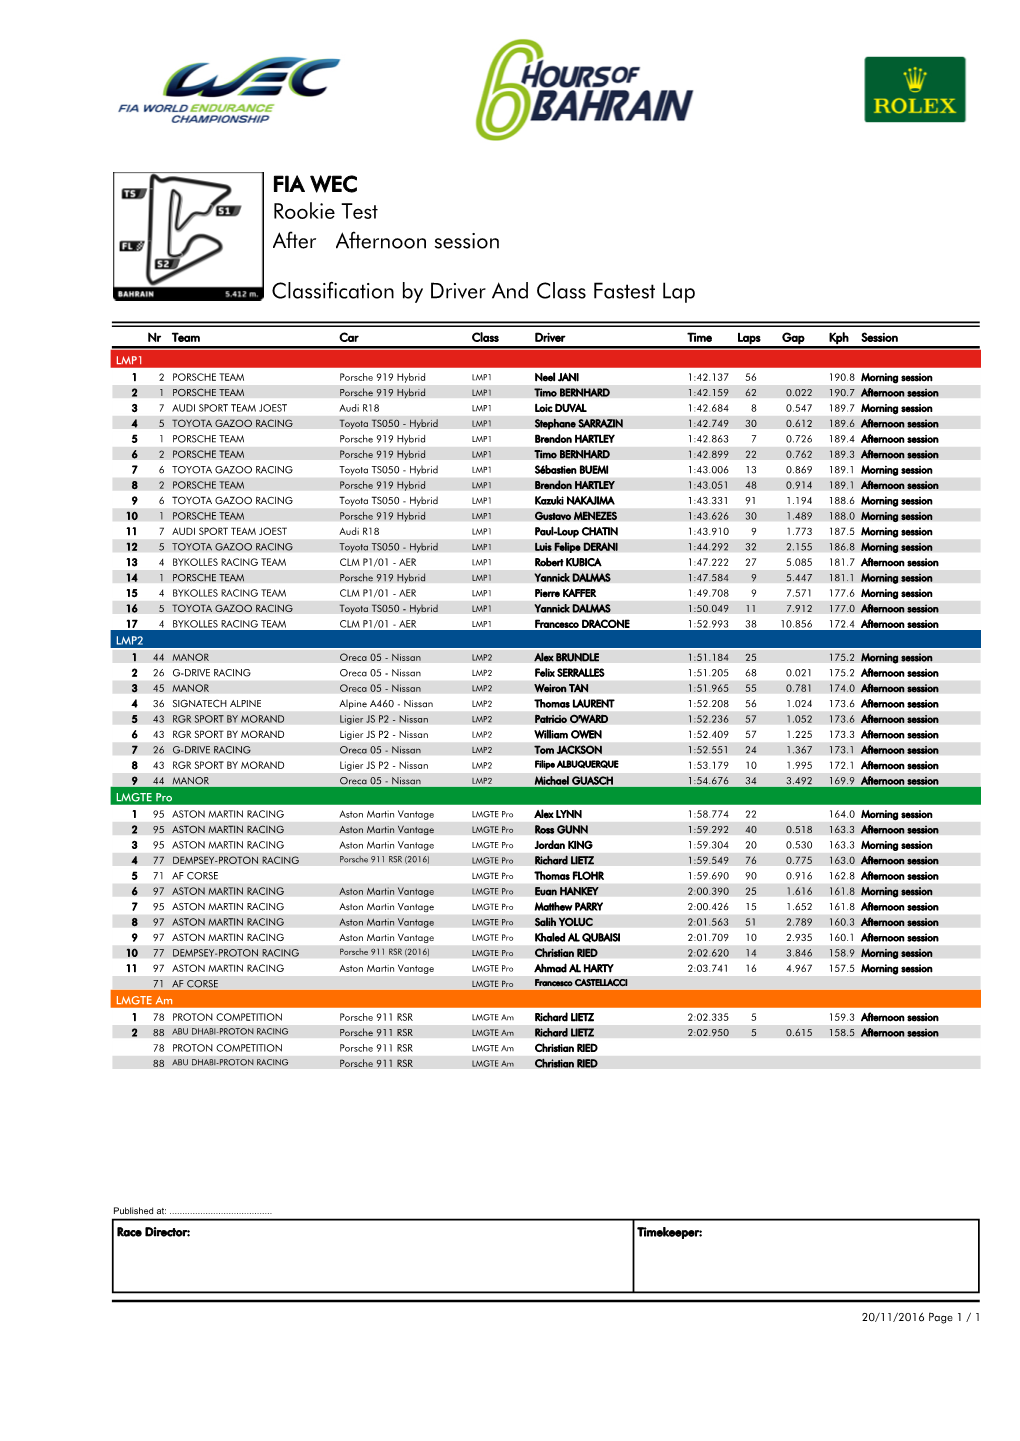 Afternoon Session Rookie Test FIA WEC After Classification by Driver